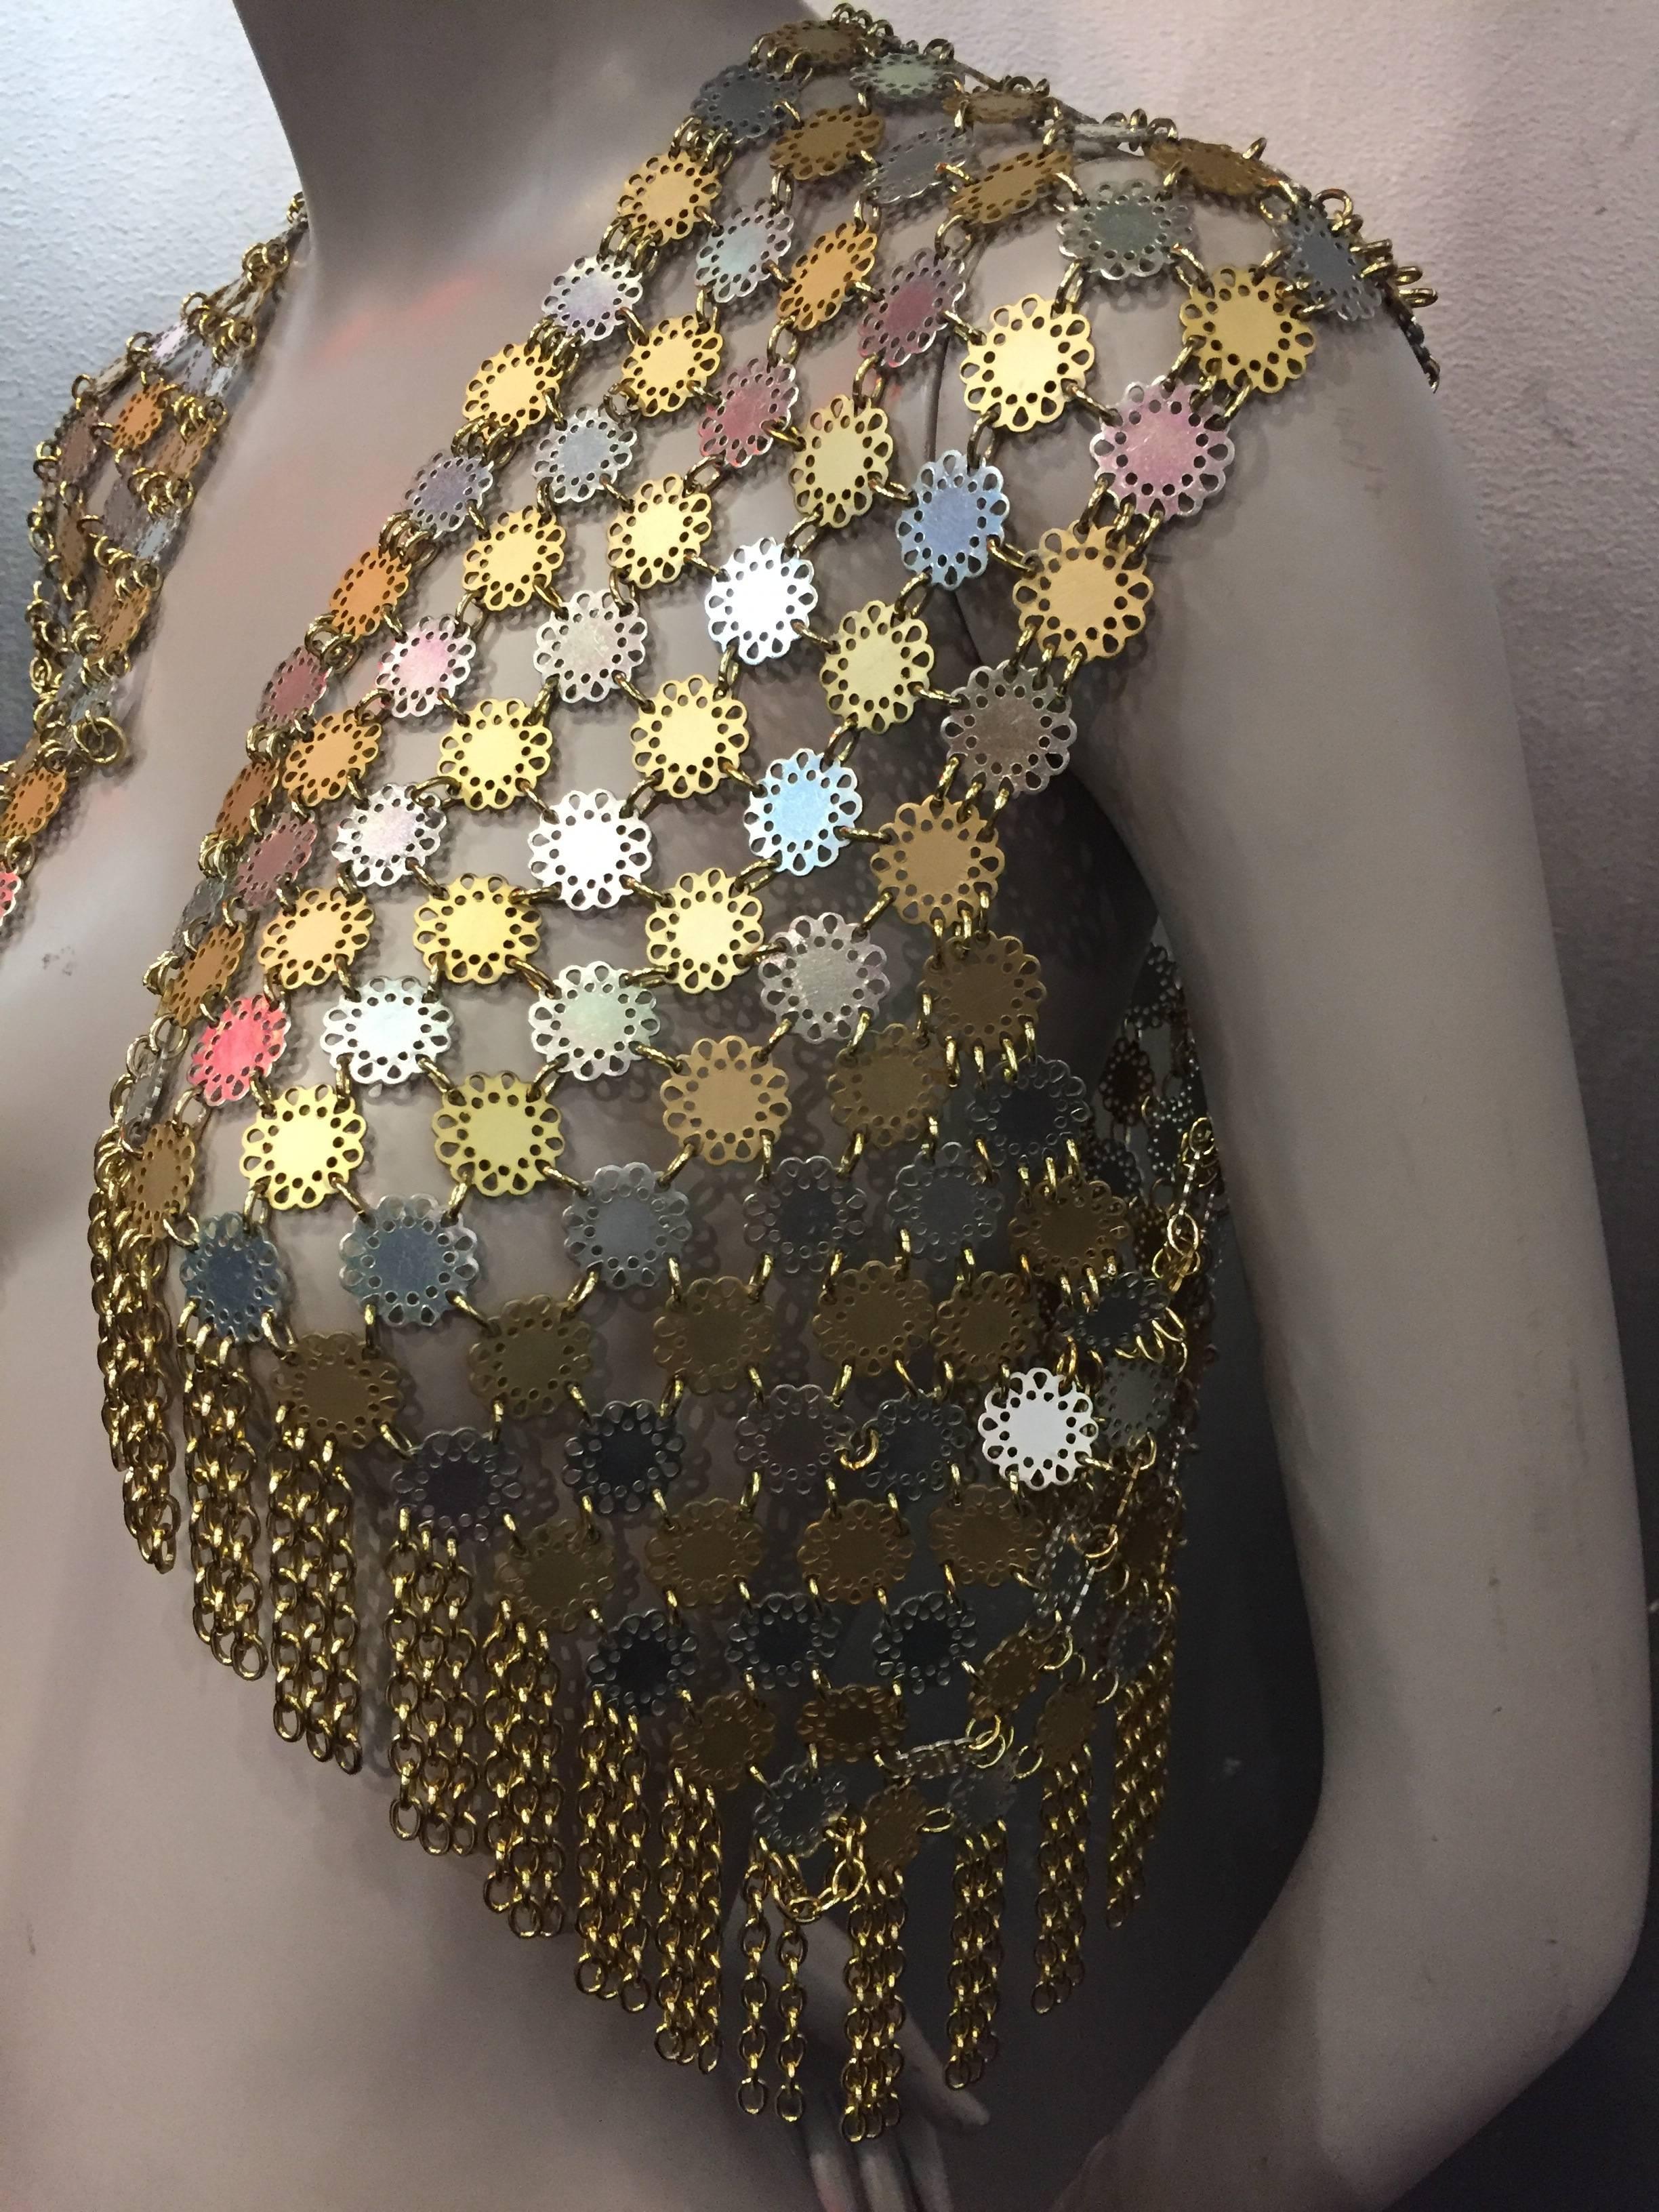 Paco Rabanne was widely considered the enfant terrible of French fashion. 

This iconic vest of metal discs is reminiscent of 60's mod flowers. Linked in aluminum and gold, the two-tone metallic color combination adds a vibrant feel to the chainmail